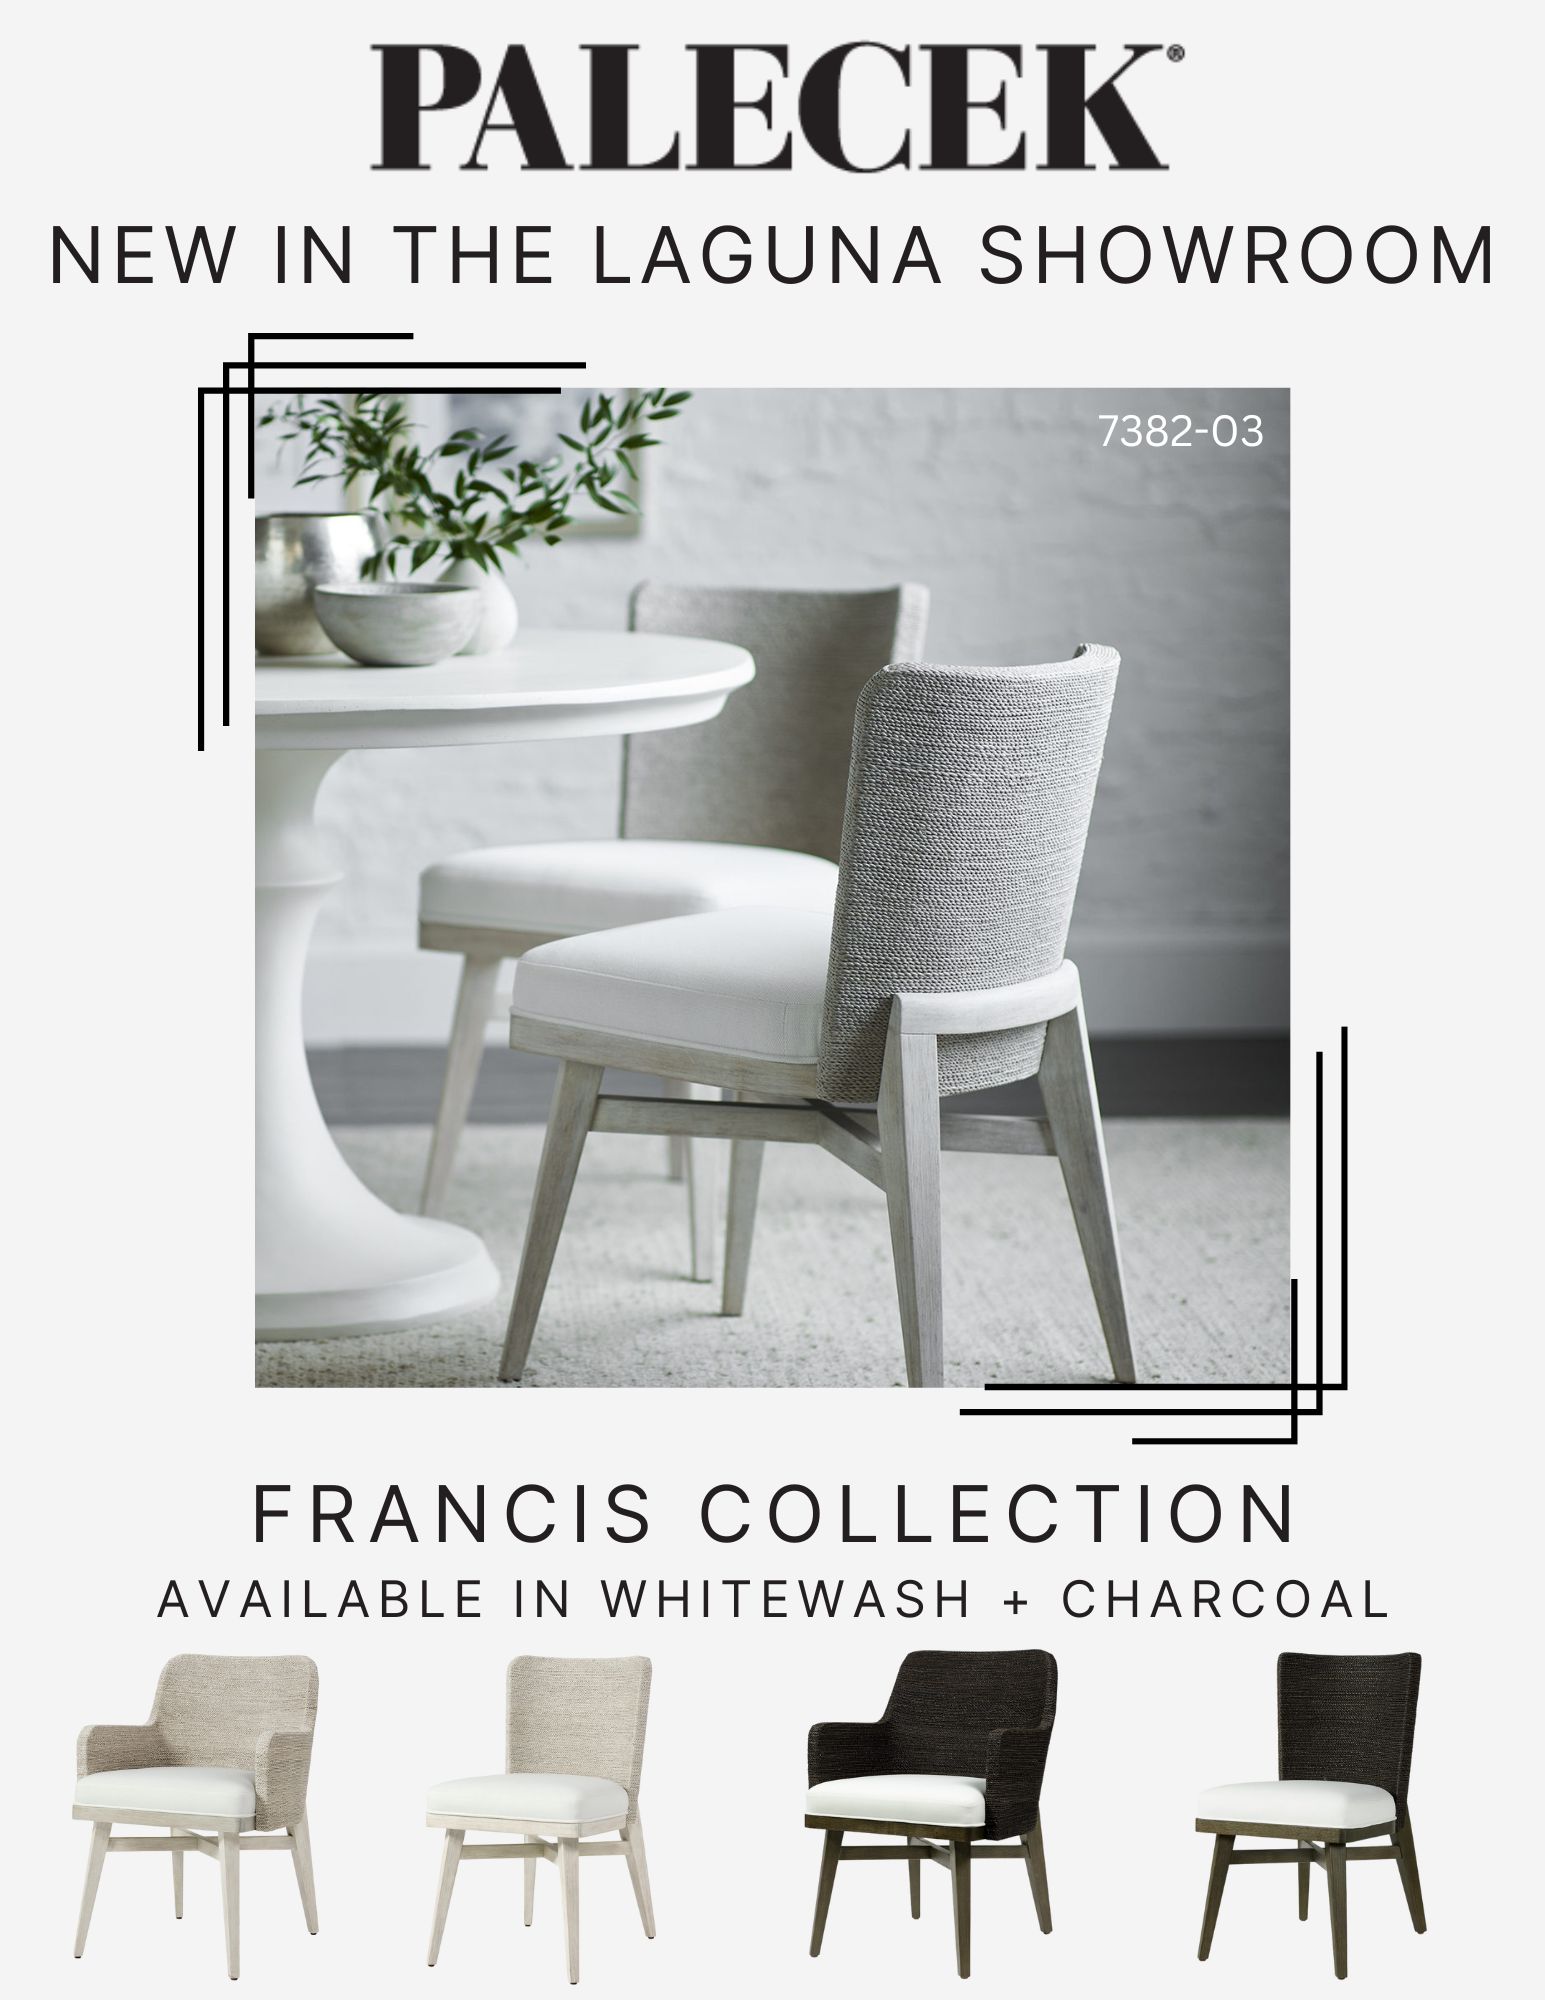 FRANCIS COLLECTION at PALECEK - News from Laguna Design Center